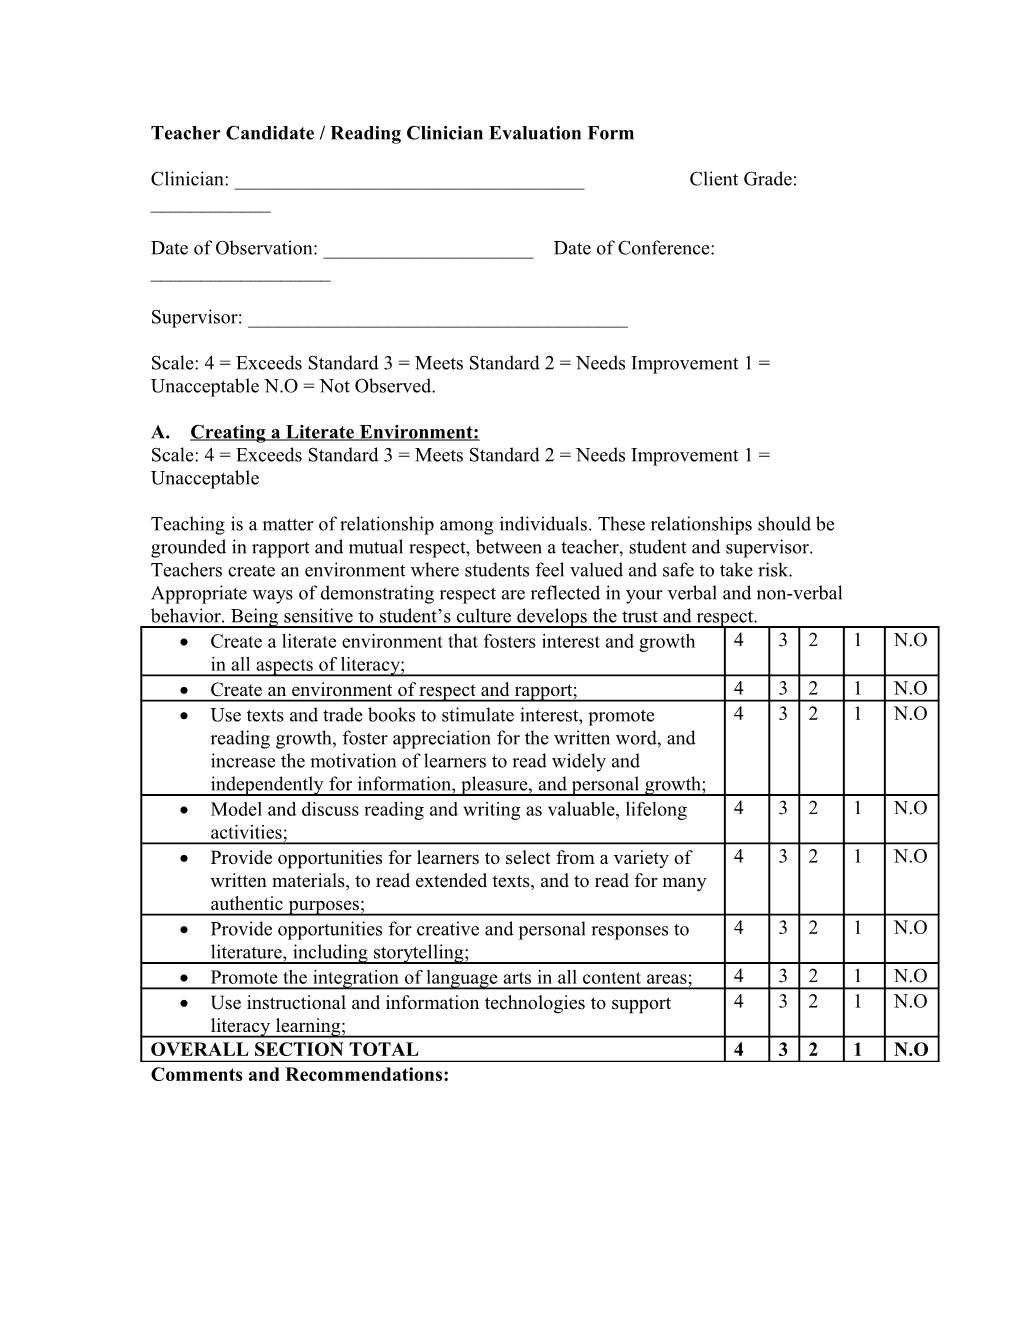 Teacher Candidate / Reading Clinician Evaluation Form